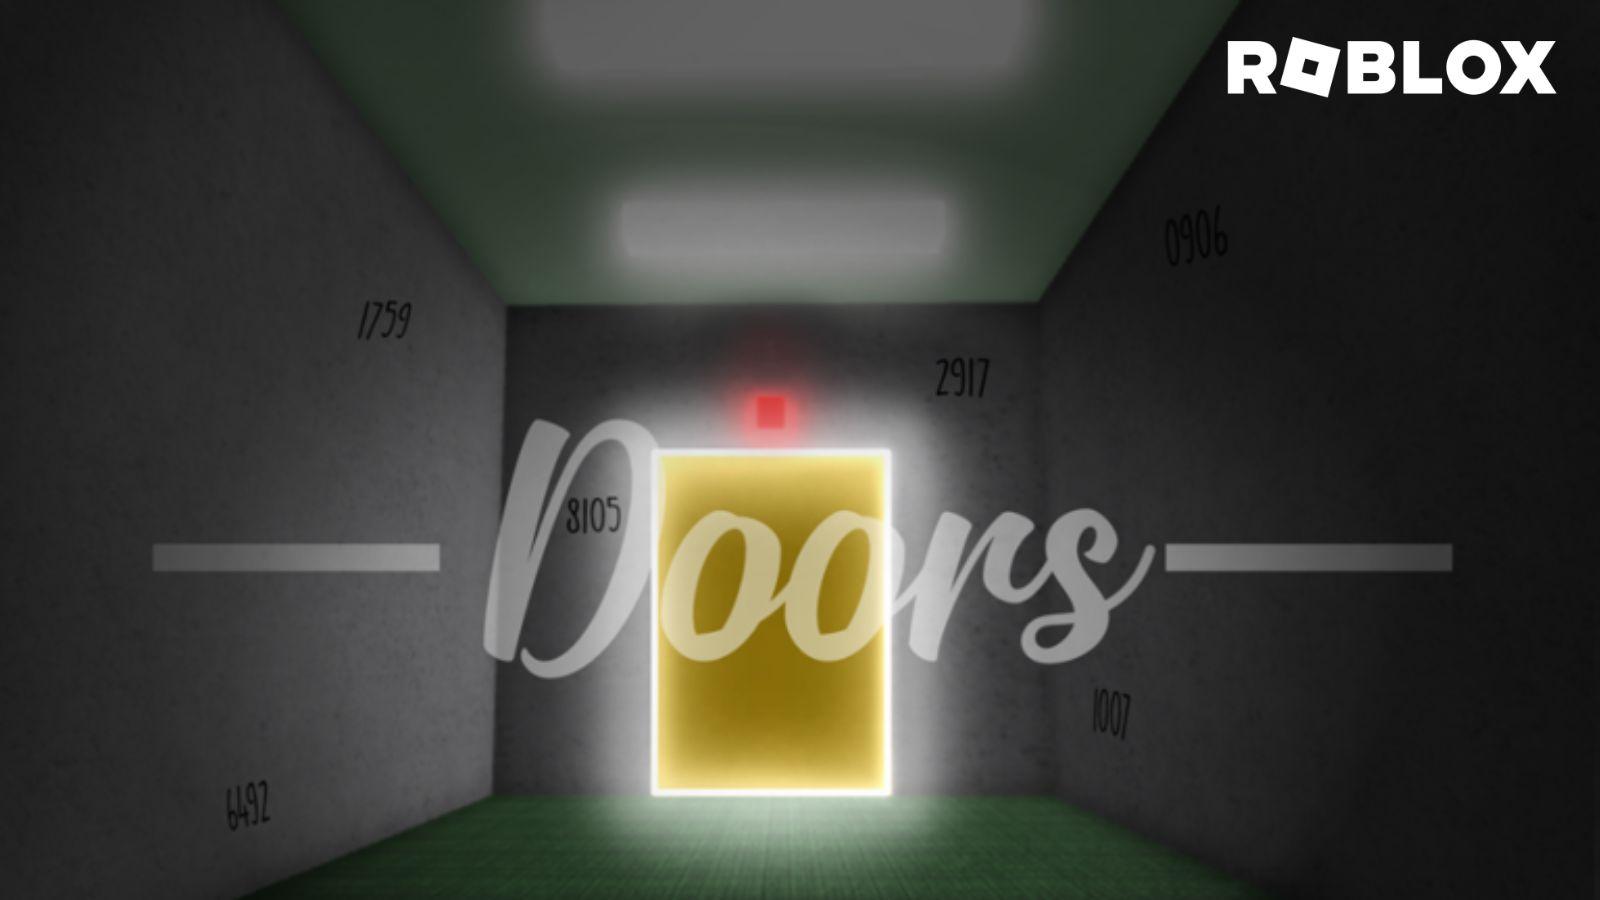 First I got shadow then the blood room then eyes in puzzle room, how rare?  : r/doors_roblox